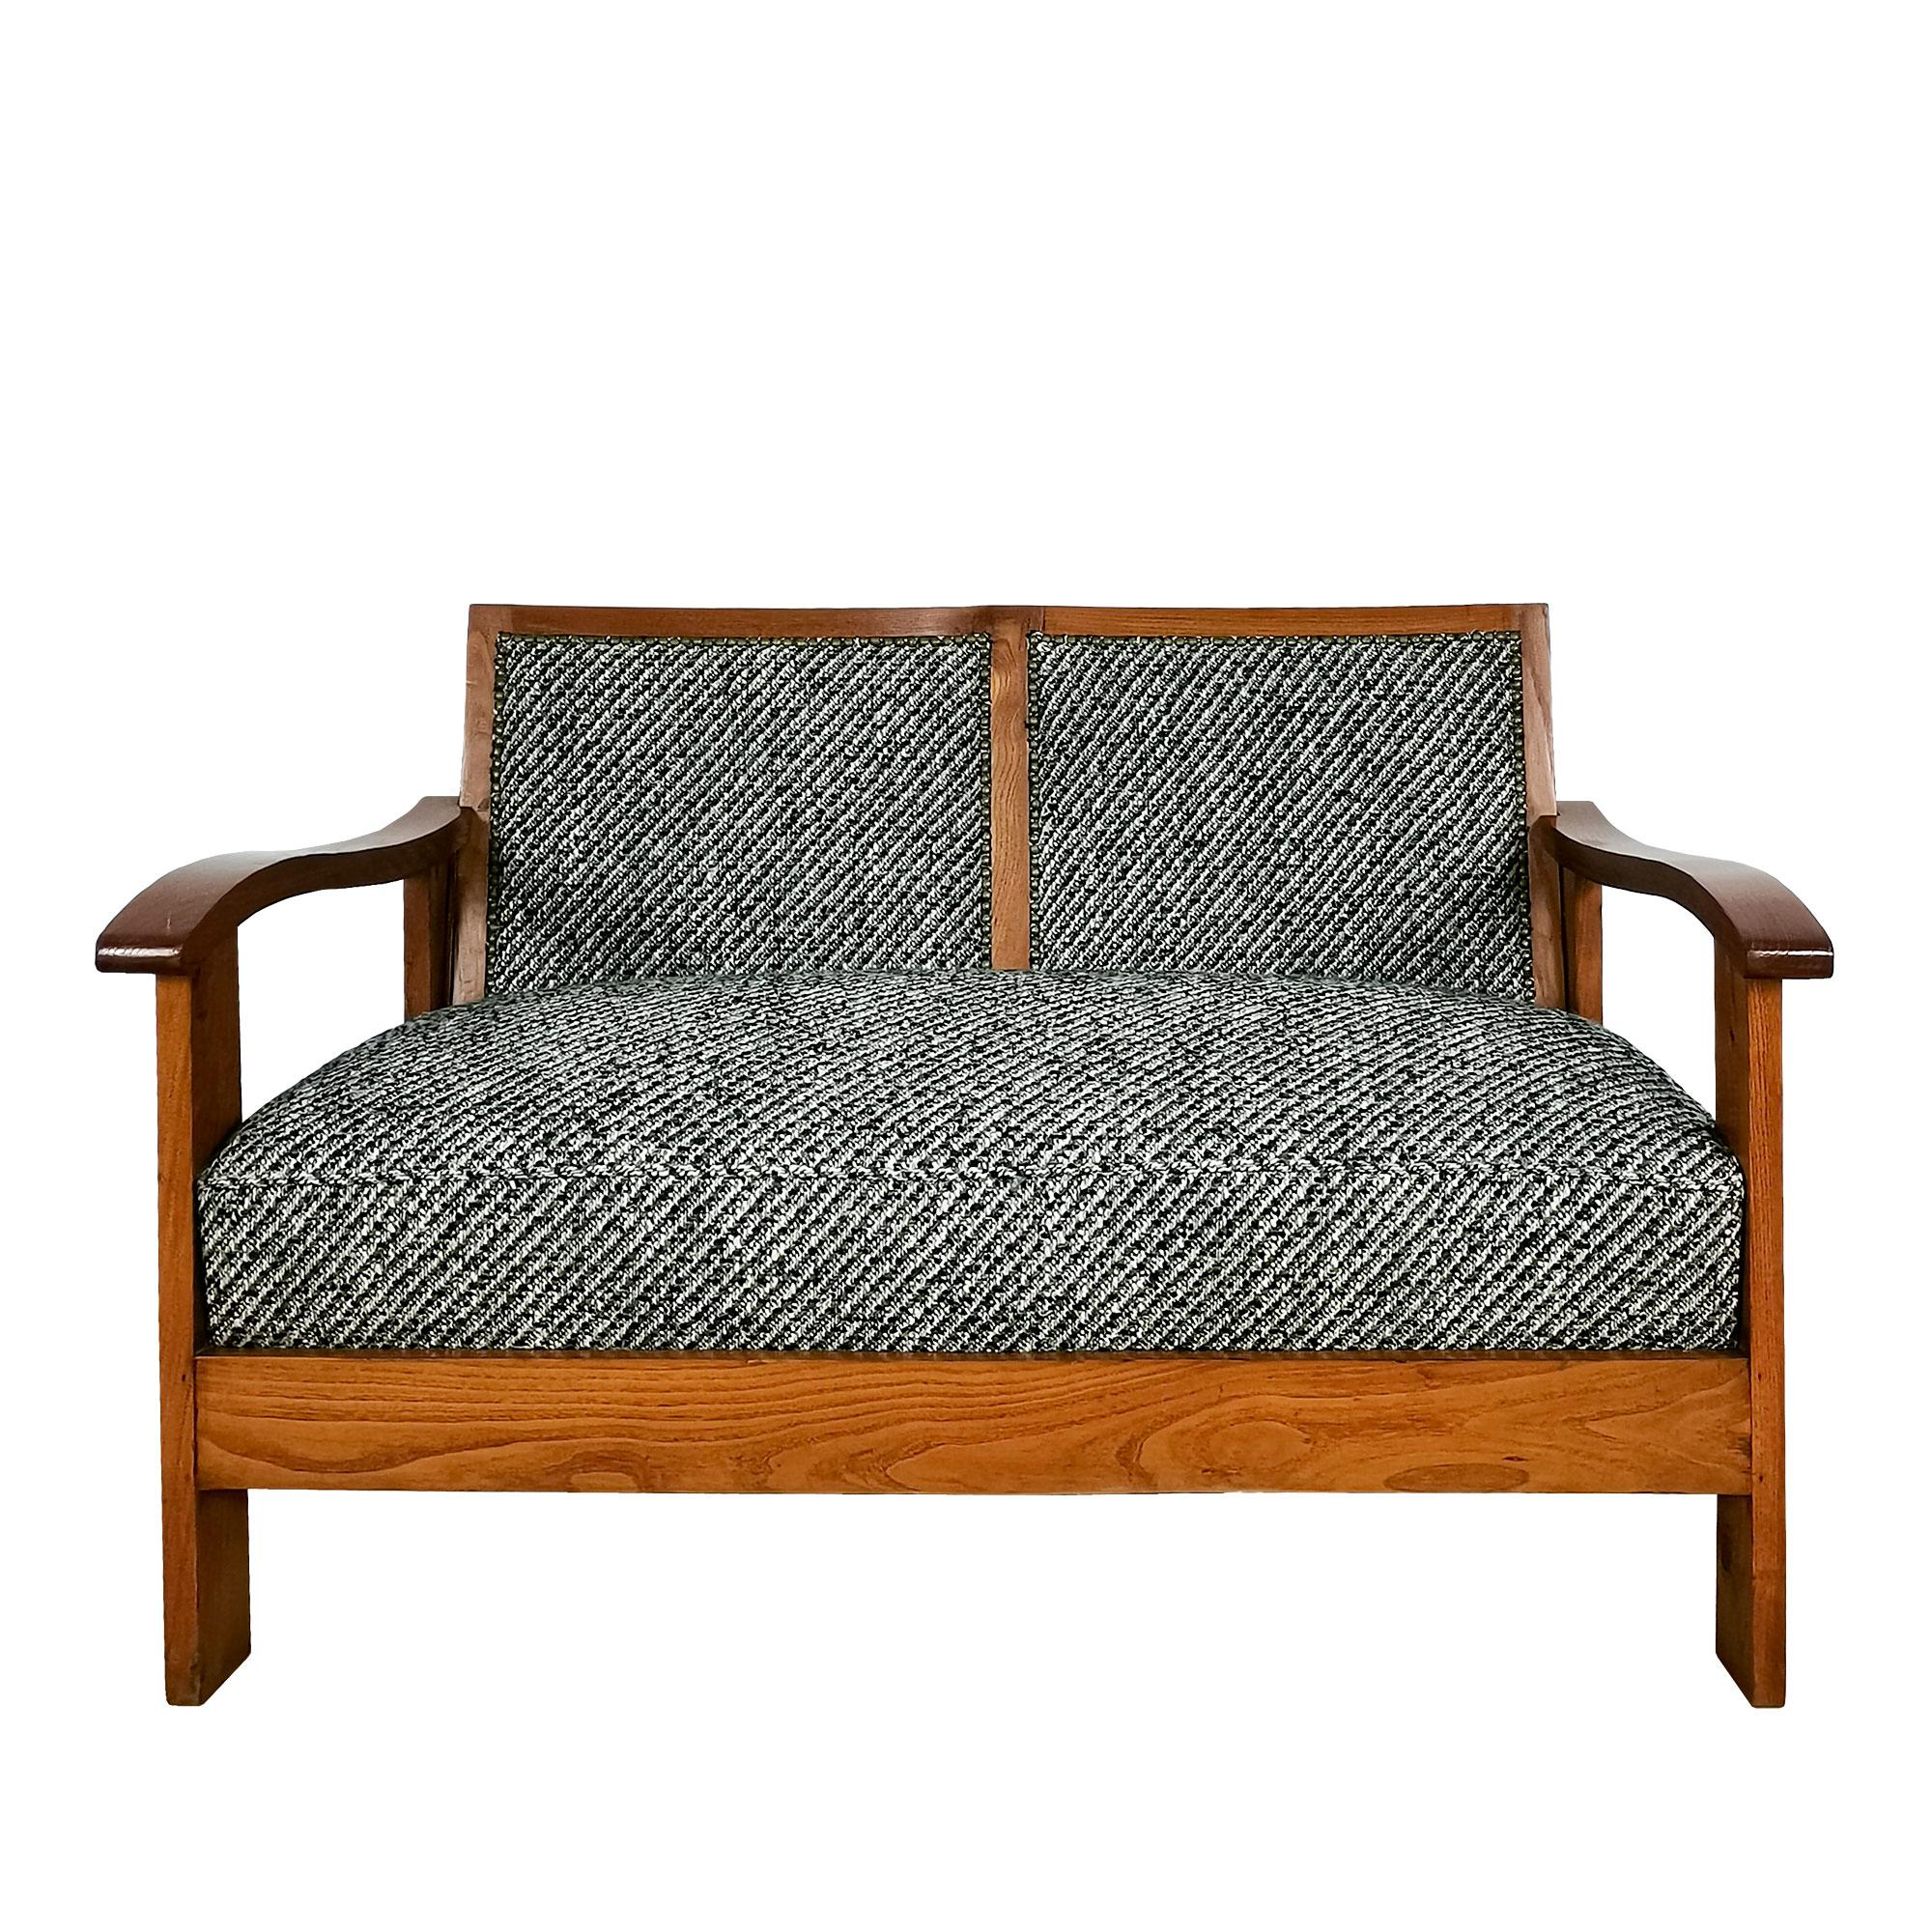 Art Deco living room set, sofa and two armchairs in solid oak with shellac finishing. New fillings and new upholstery in flecked wool with stripes.
Design: Josep Palau Oller

Spain, Barcelona c. 1930

Measures: cm sofa 113 x 71 x 74 armchair 63